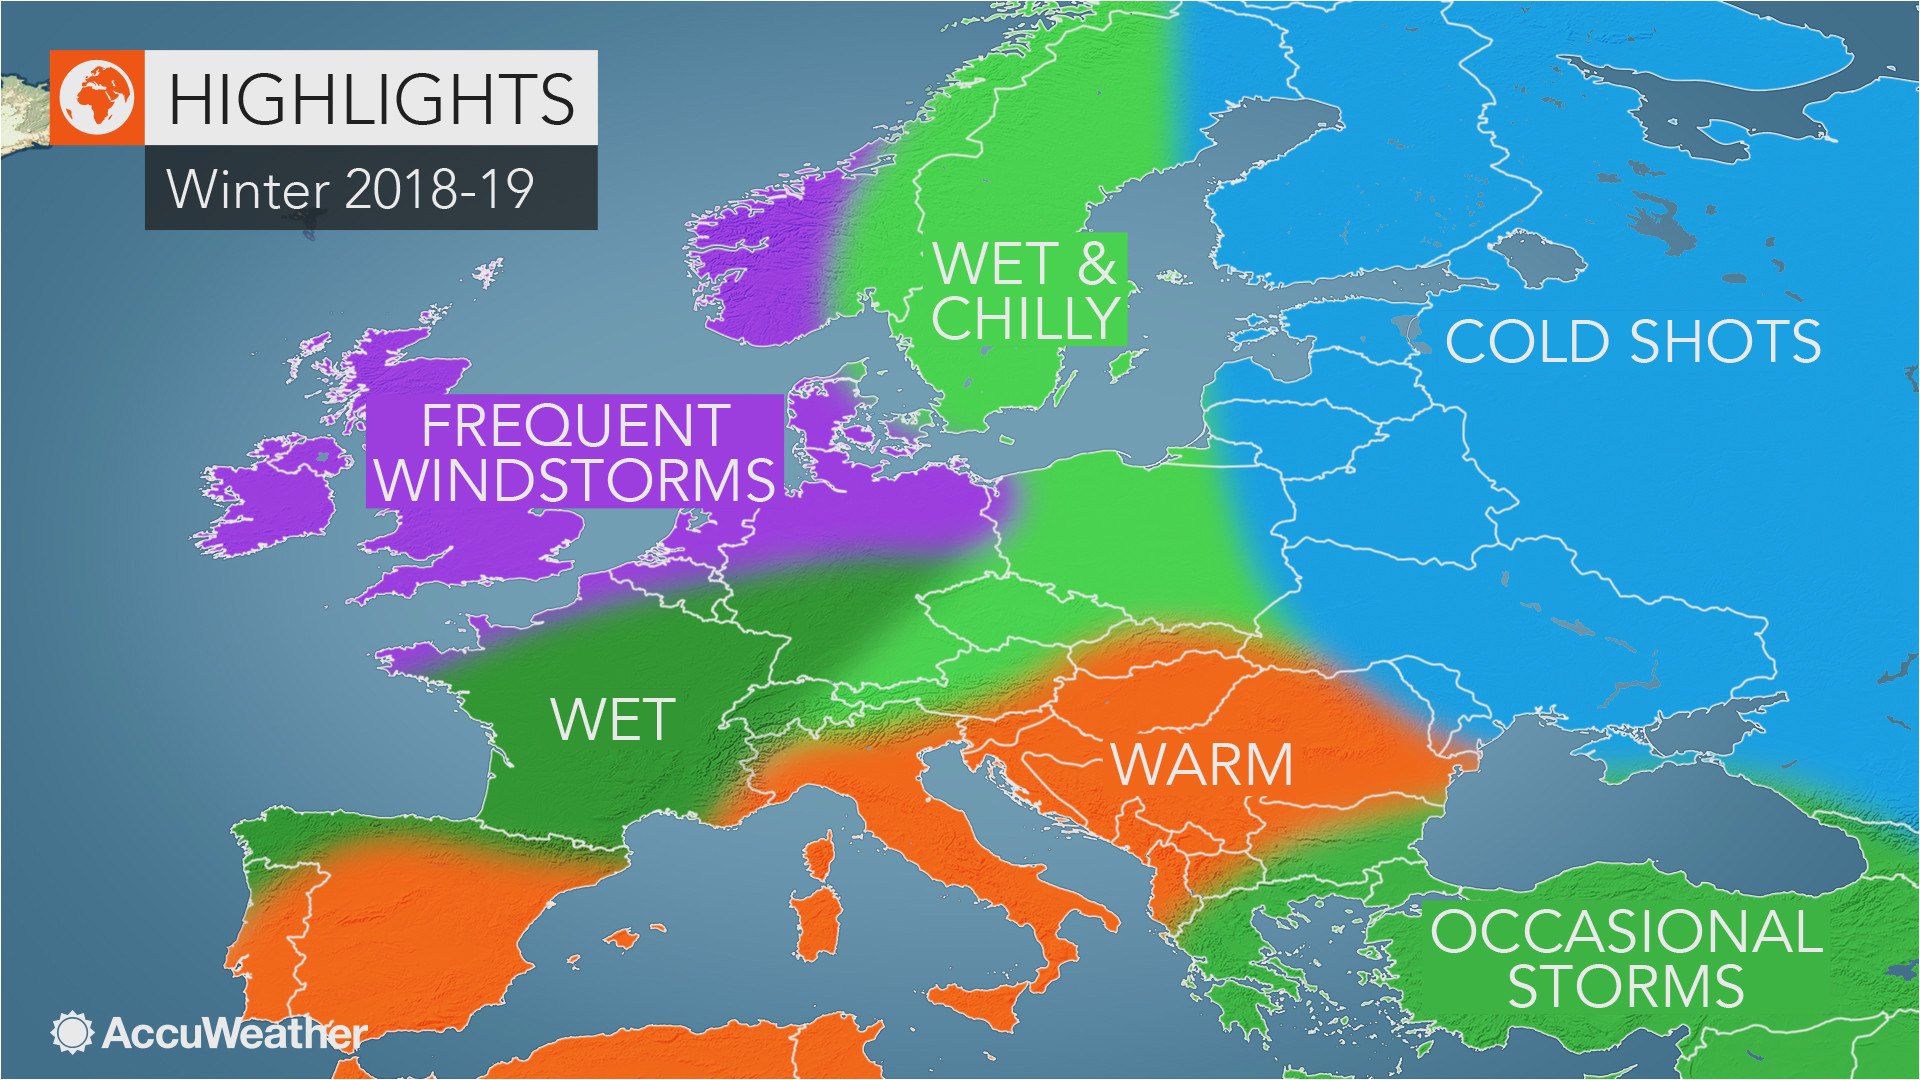 accuweather s europe winter forecast for the 2018 2019 season